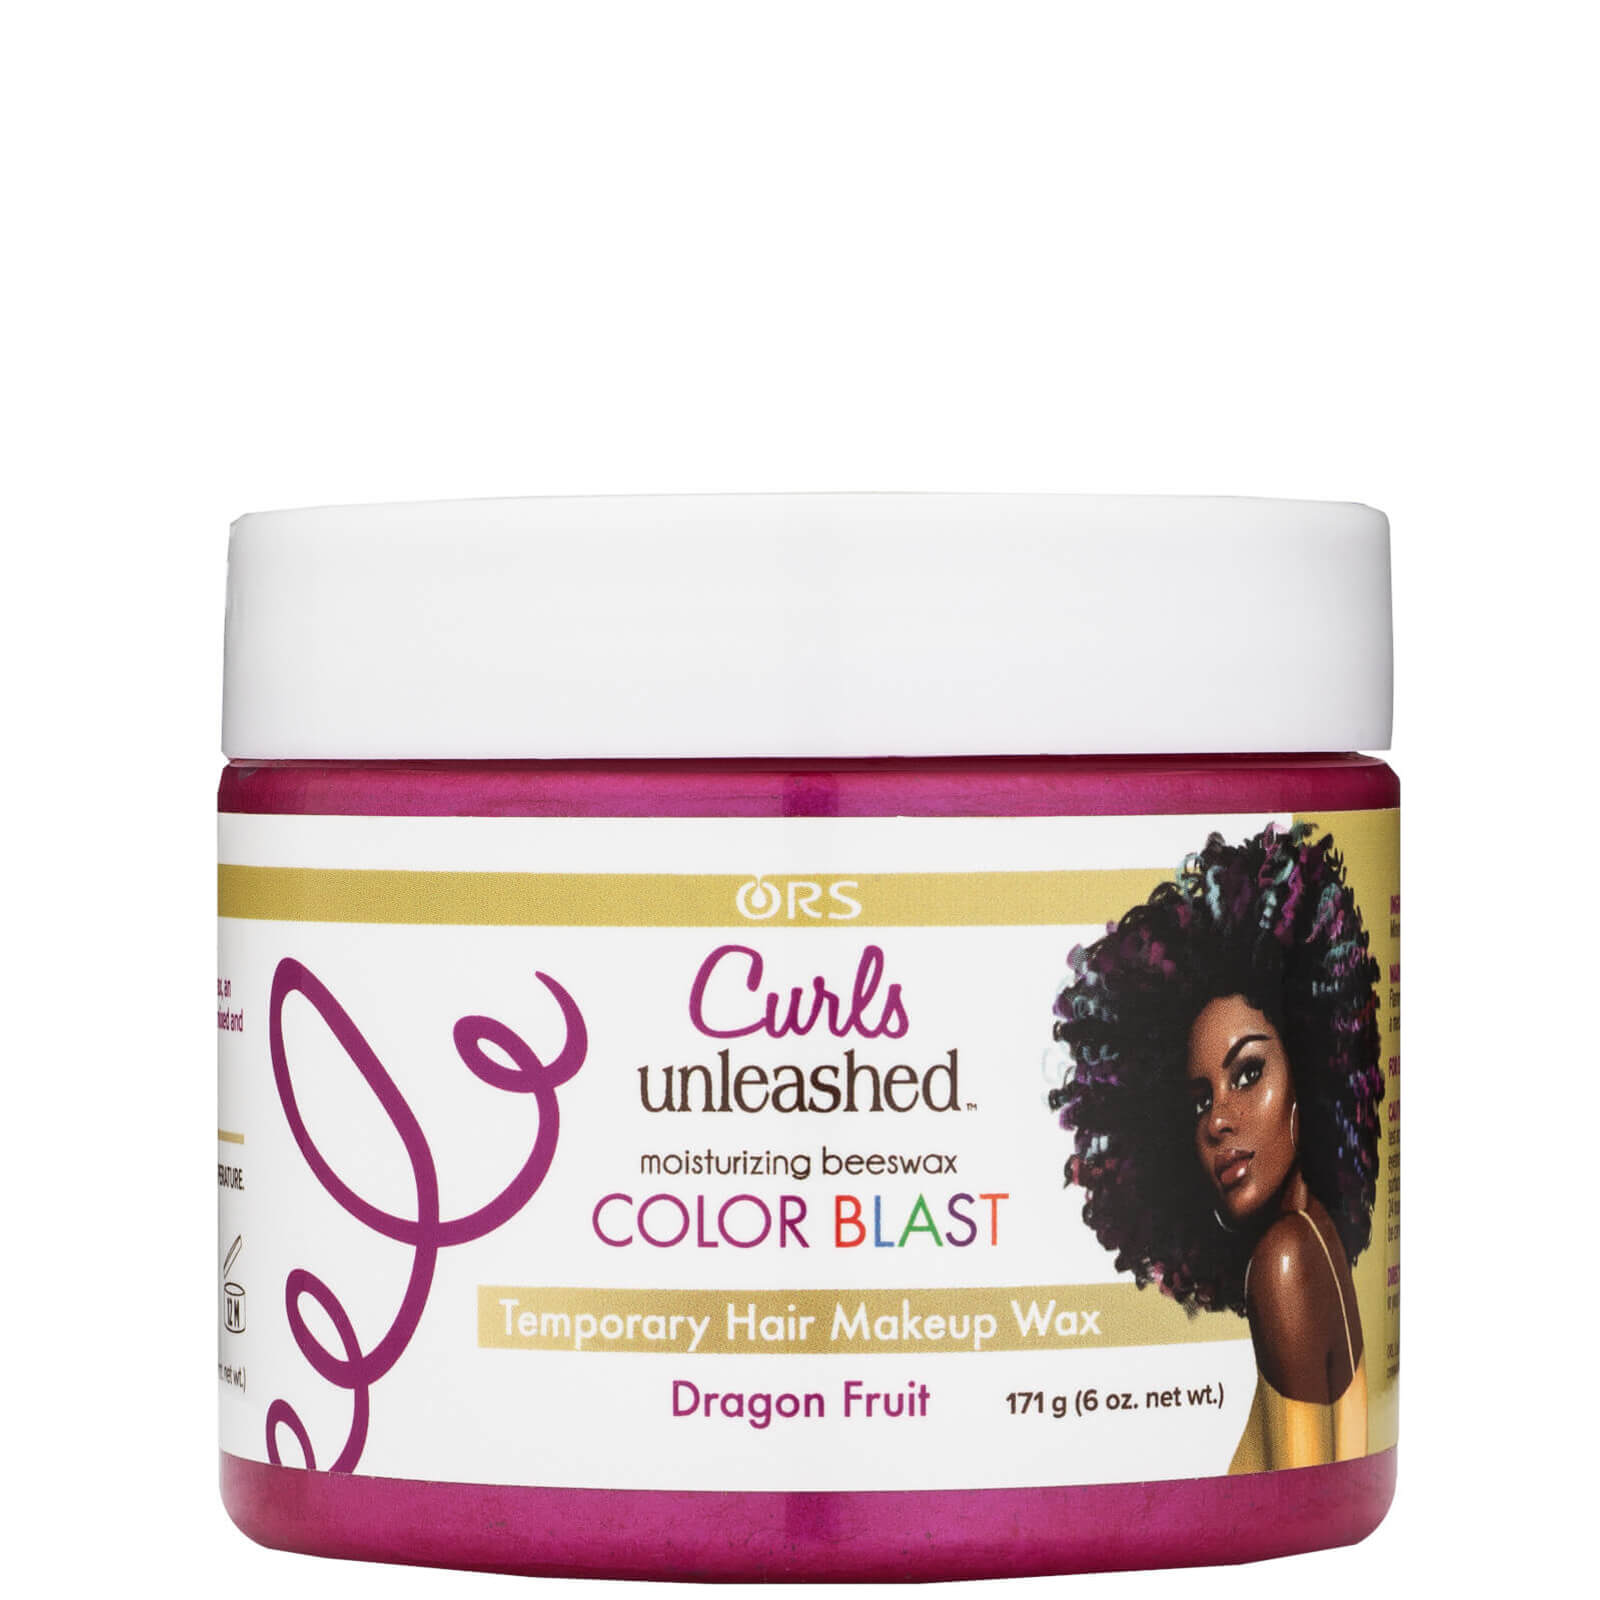 Image of Hair Makeup Wax Curls Unleashed Colour Blast Temporary - Dragon Fruit ORS